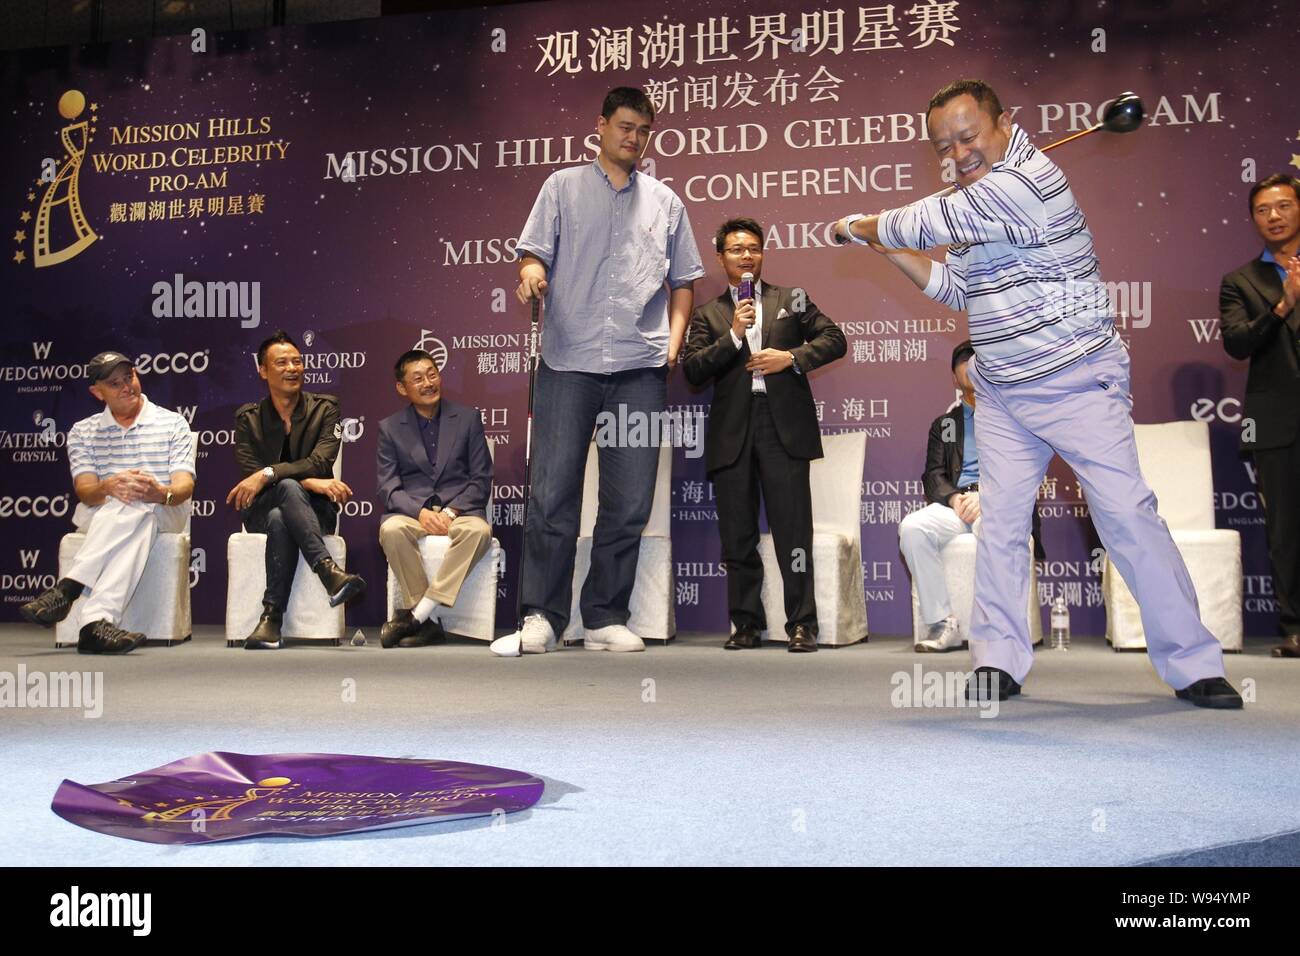 Retired Chinese basketball superstar Yao Ming and Hong Kong actor Eric Tsang play with golf clubs during the press conference for Mission Hills 2012 W Stock Photo